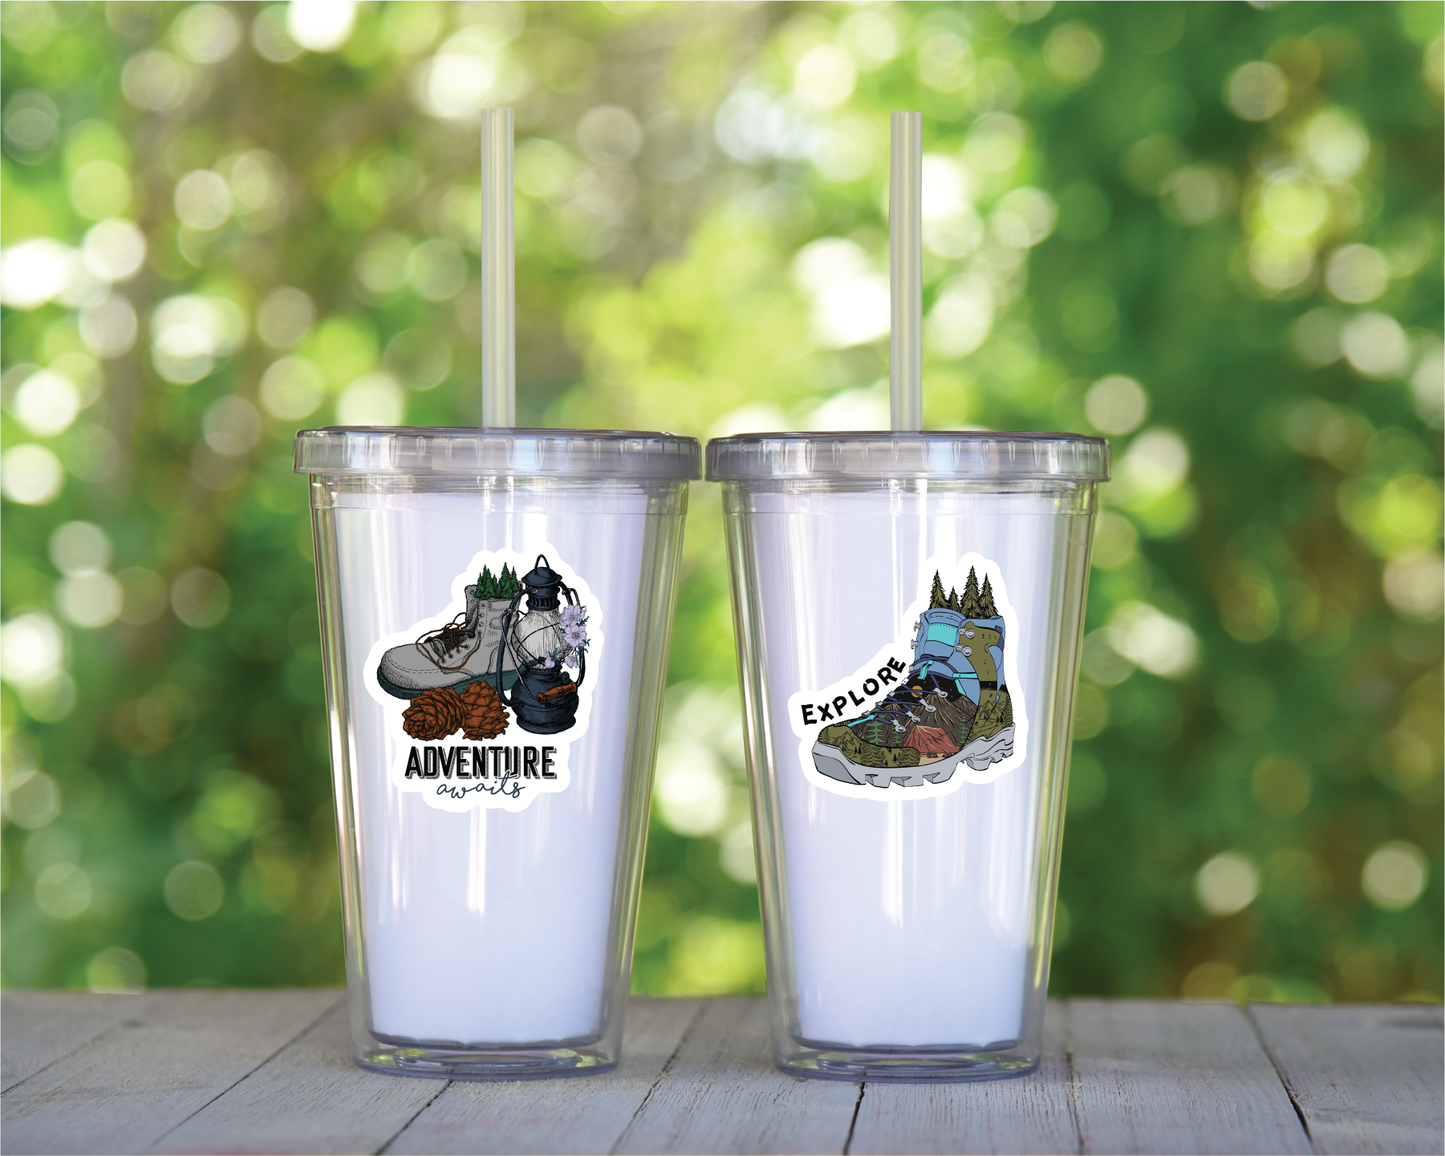 Camp And Explore - Full Color Vinyl Stickers (SHIPS IN 3-7 BUS DAYS)